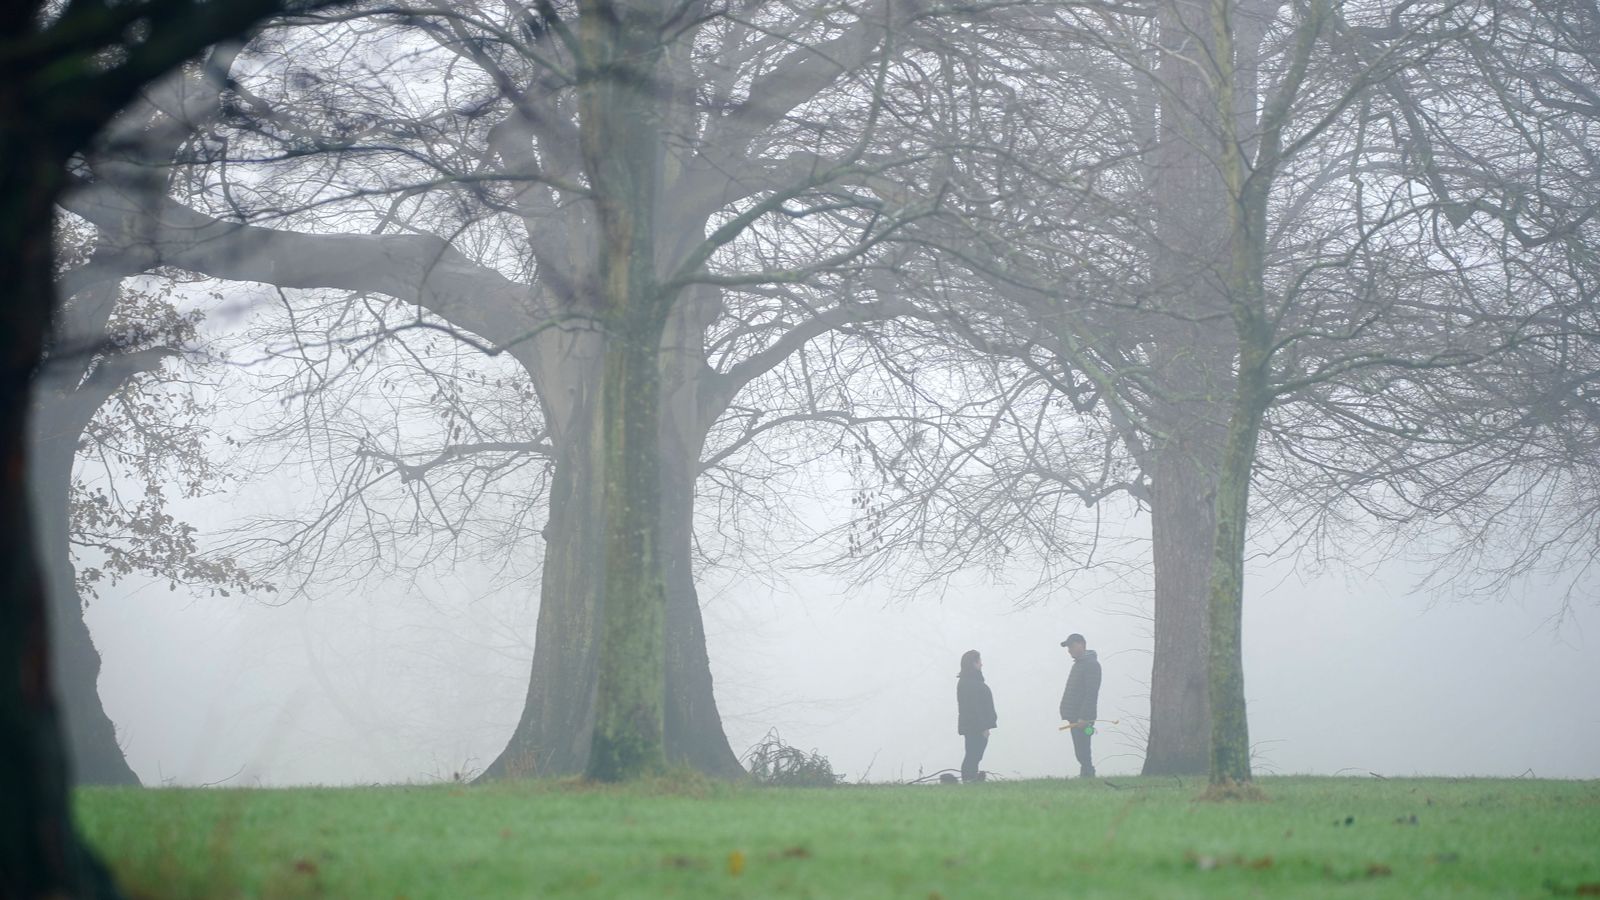 UK weather: Freezing fog could disrupt travel as yellow weather warning issued